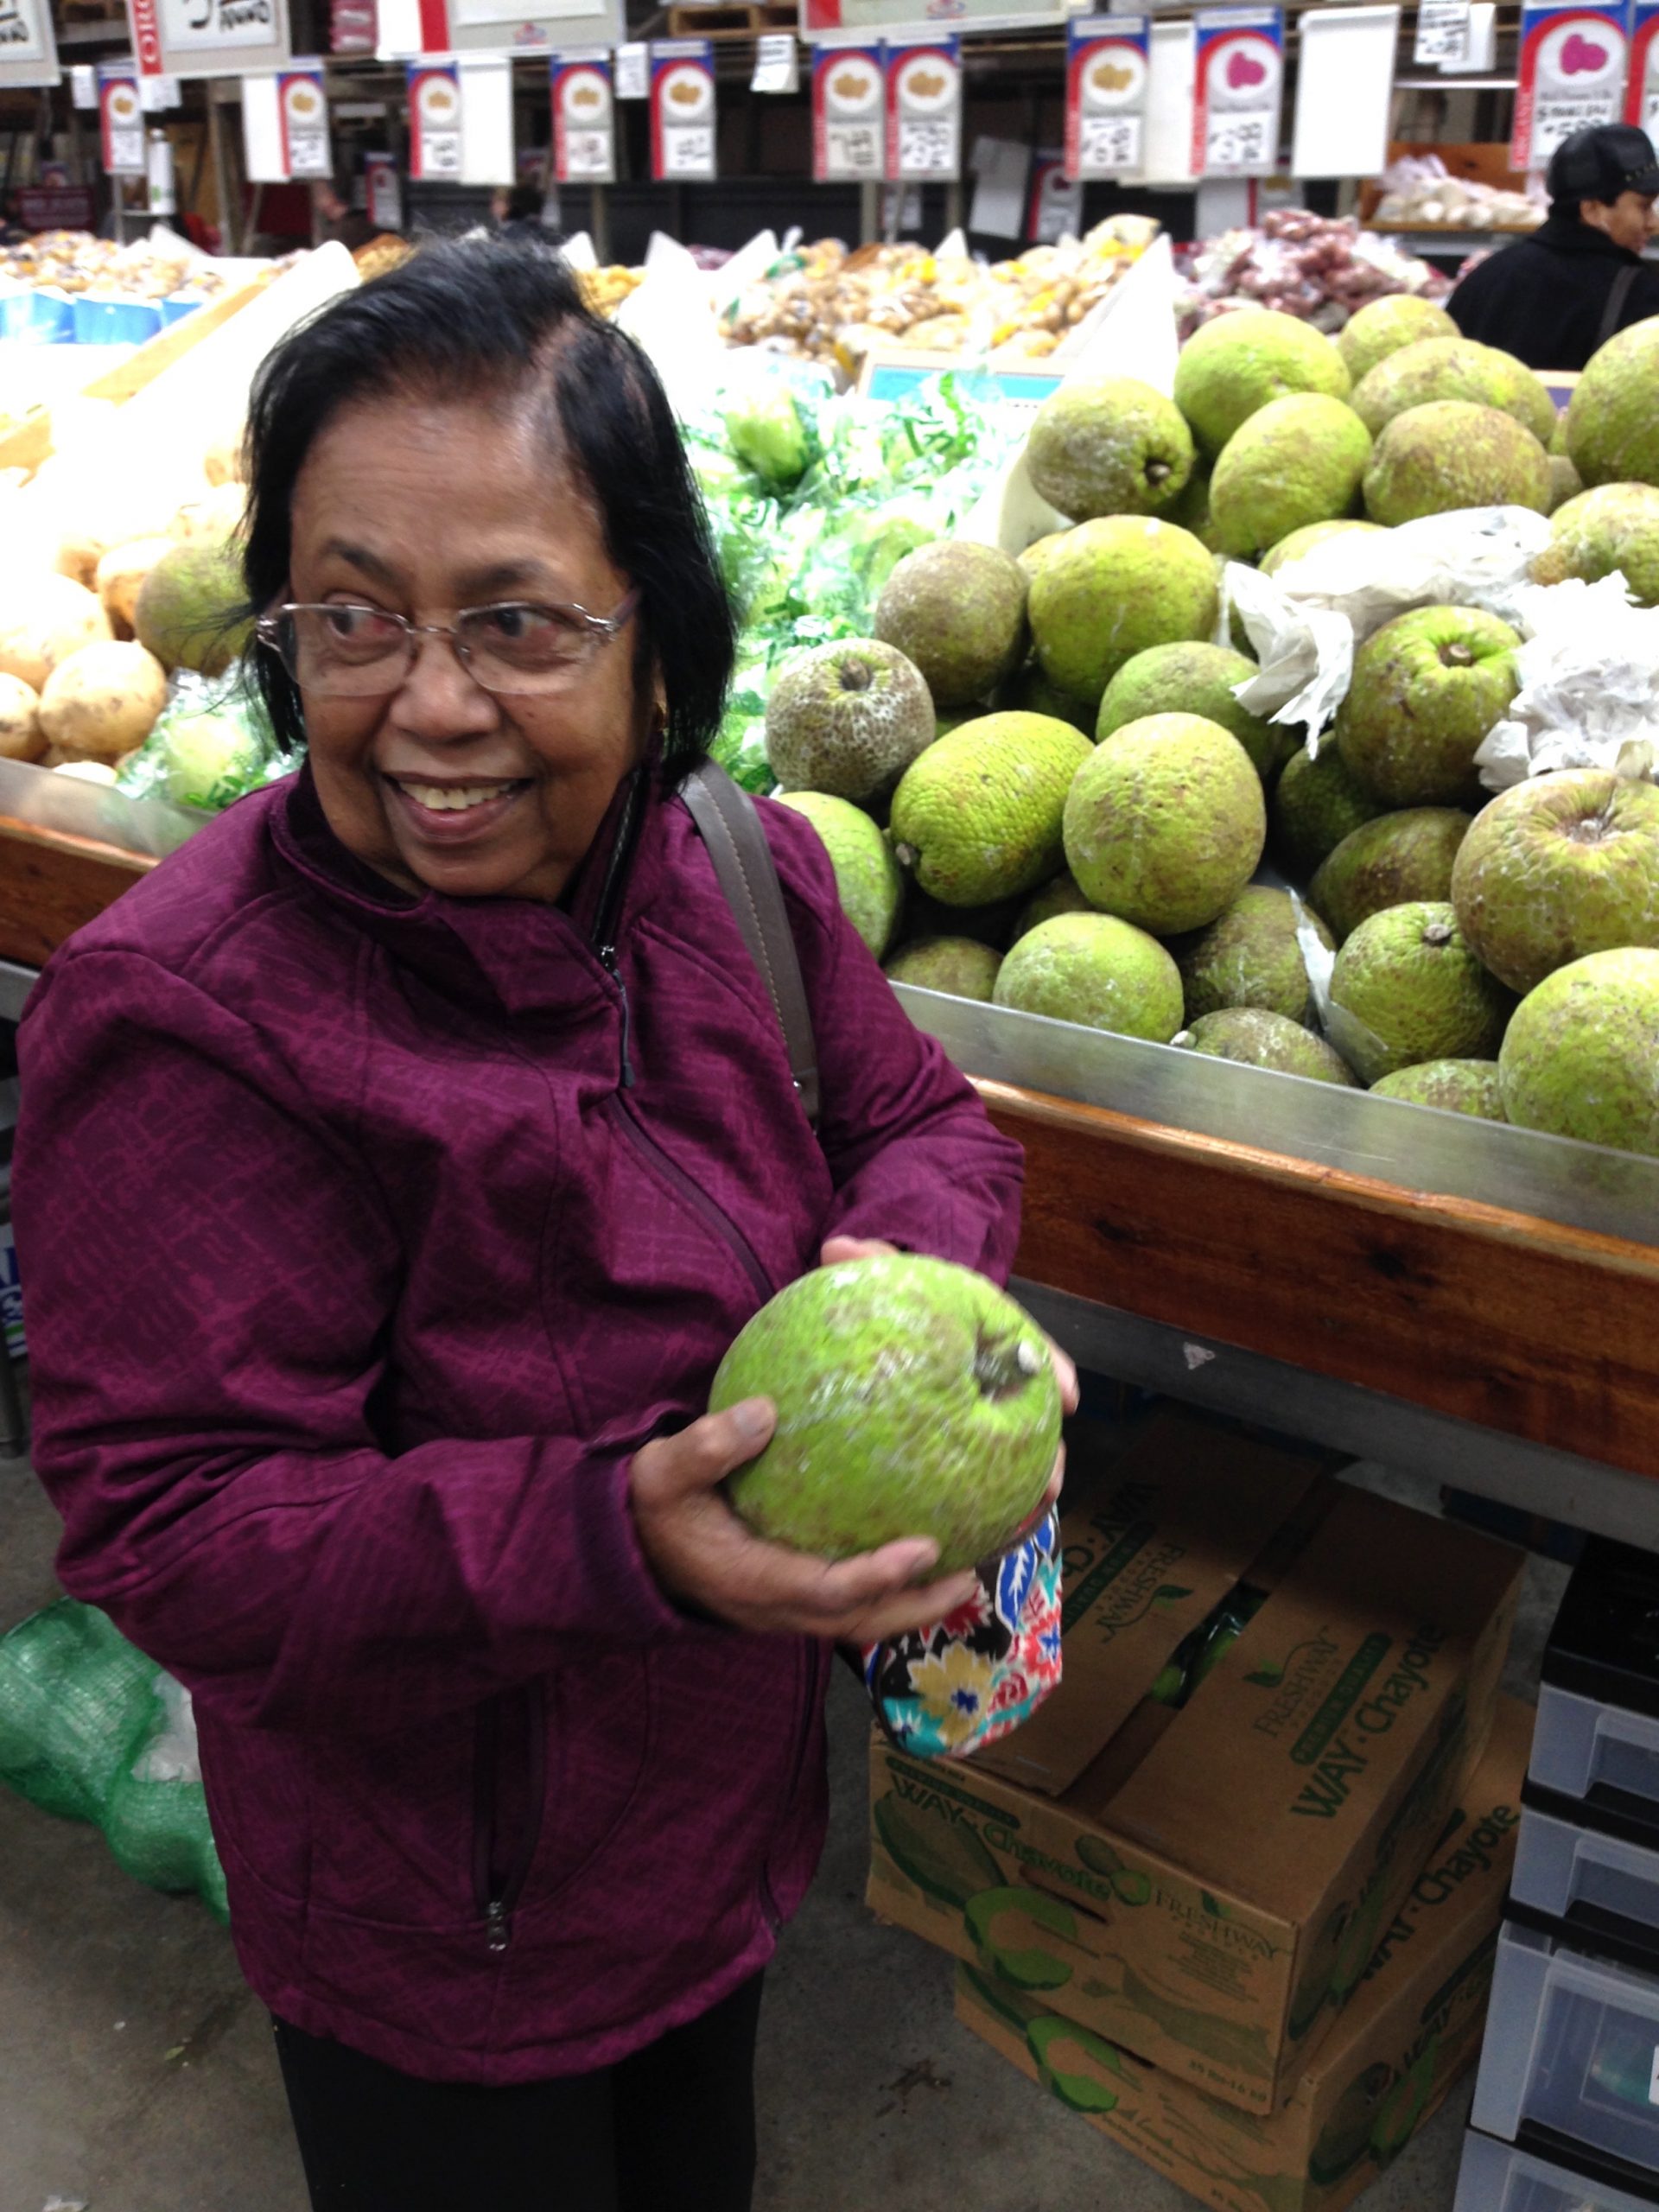 a photo of my achchi in a busy produce market, her face full of pleasant surprise. she is wearing a purple jacket and holding a breadfruit the size and shape of a green coconut. she's standing in front a whole display of them. a display that, by the look on her face, she was clearly not expecting to see.